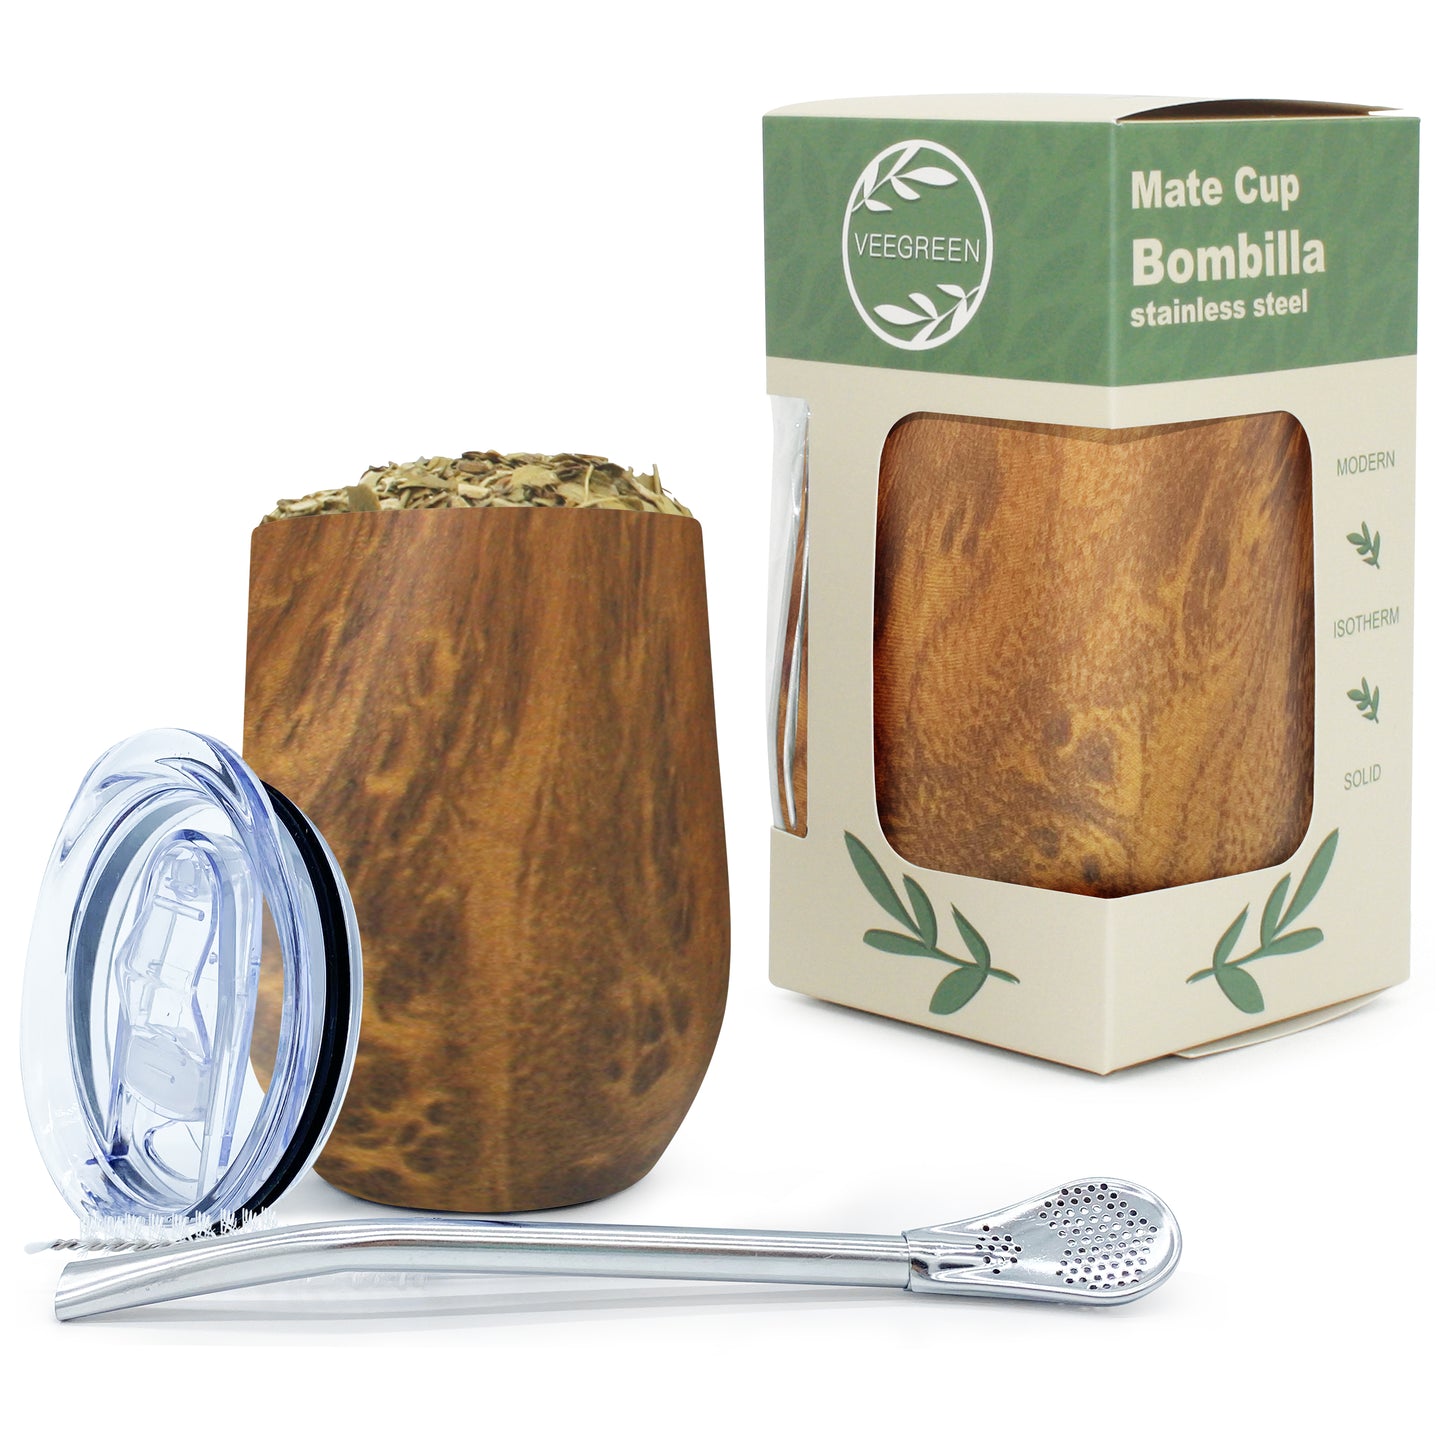 Mate calabash and Bombillas, Mate cup in stainless steel.